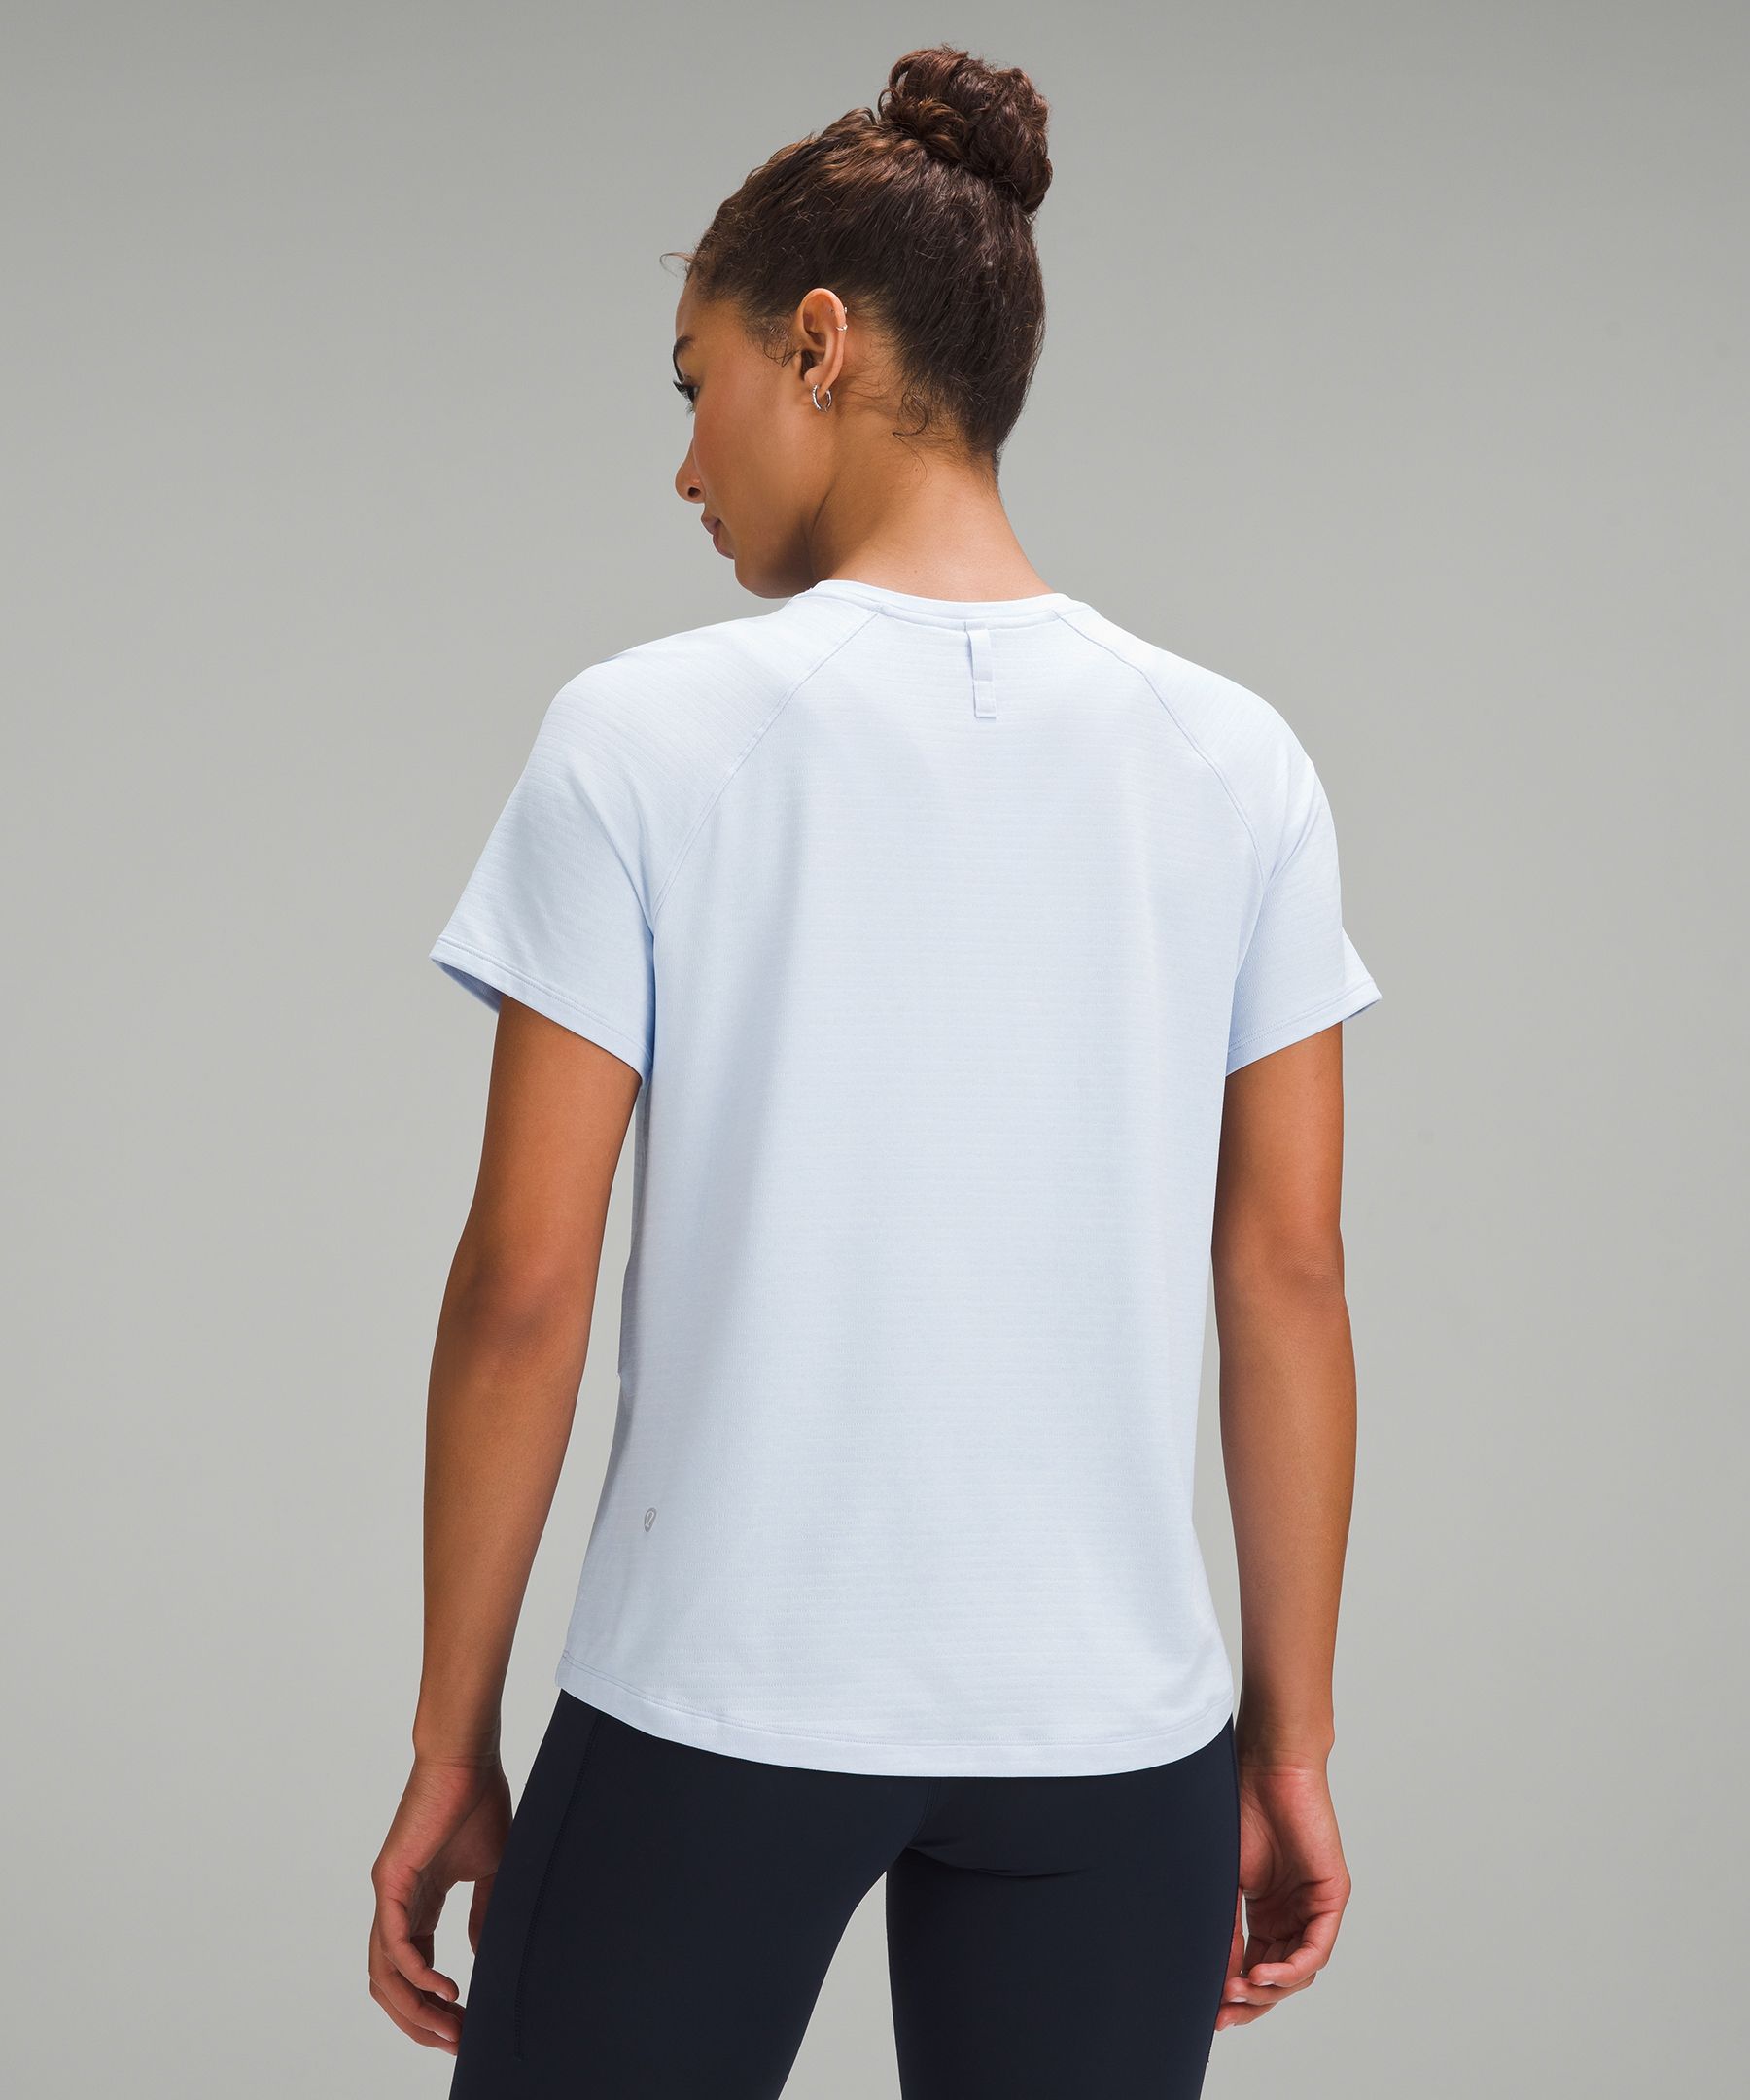 Lululemon athletica License to Train Classic-Fit Long-Sleeve Shirt, Women's Long Sleeve Shirts